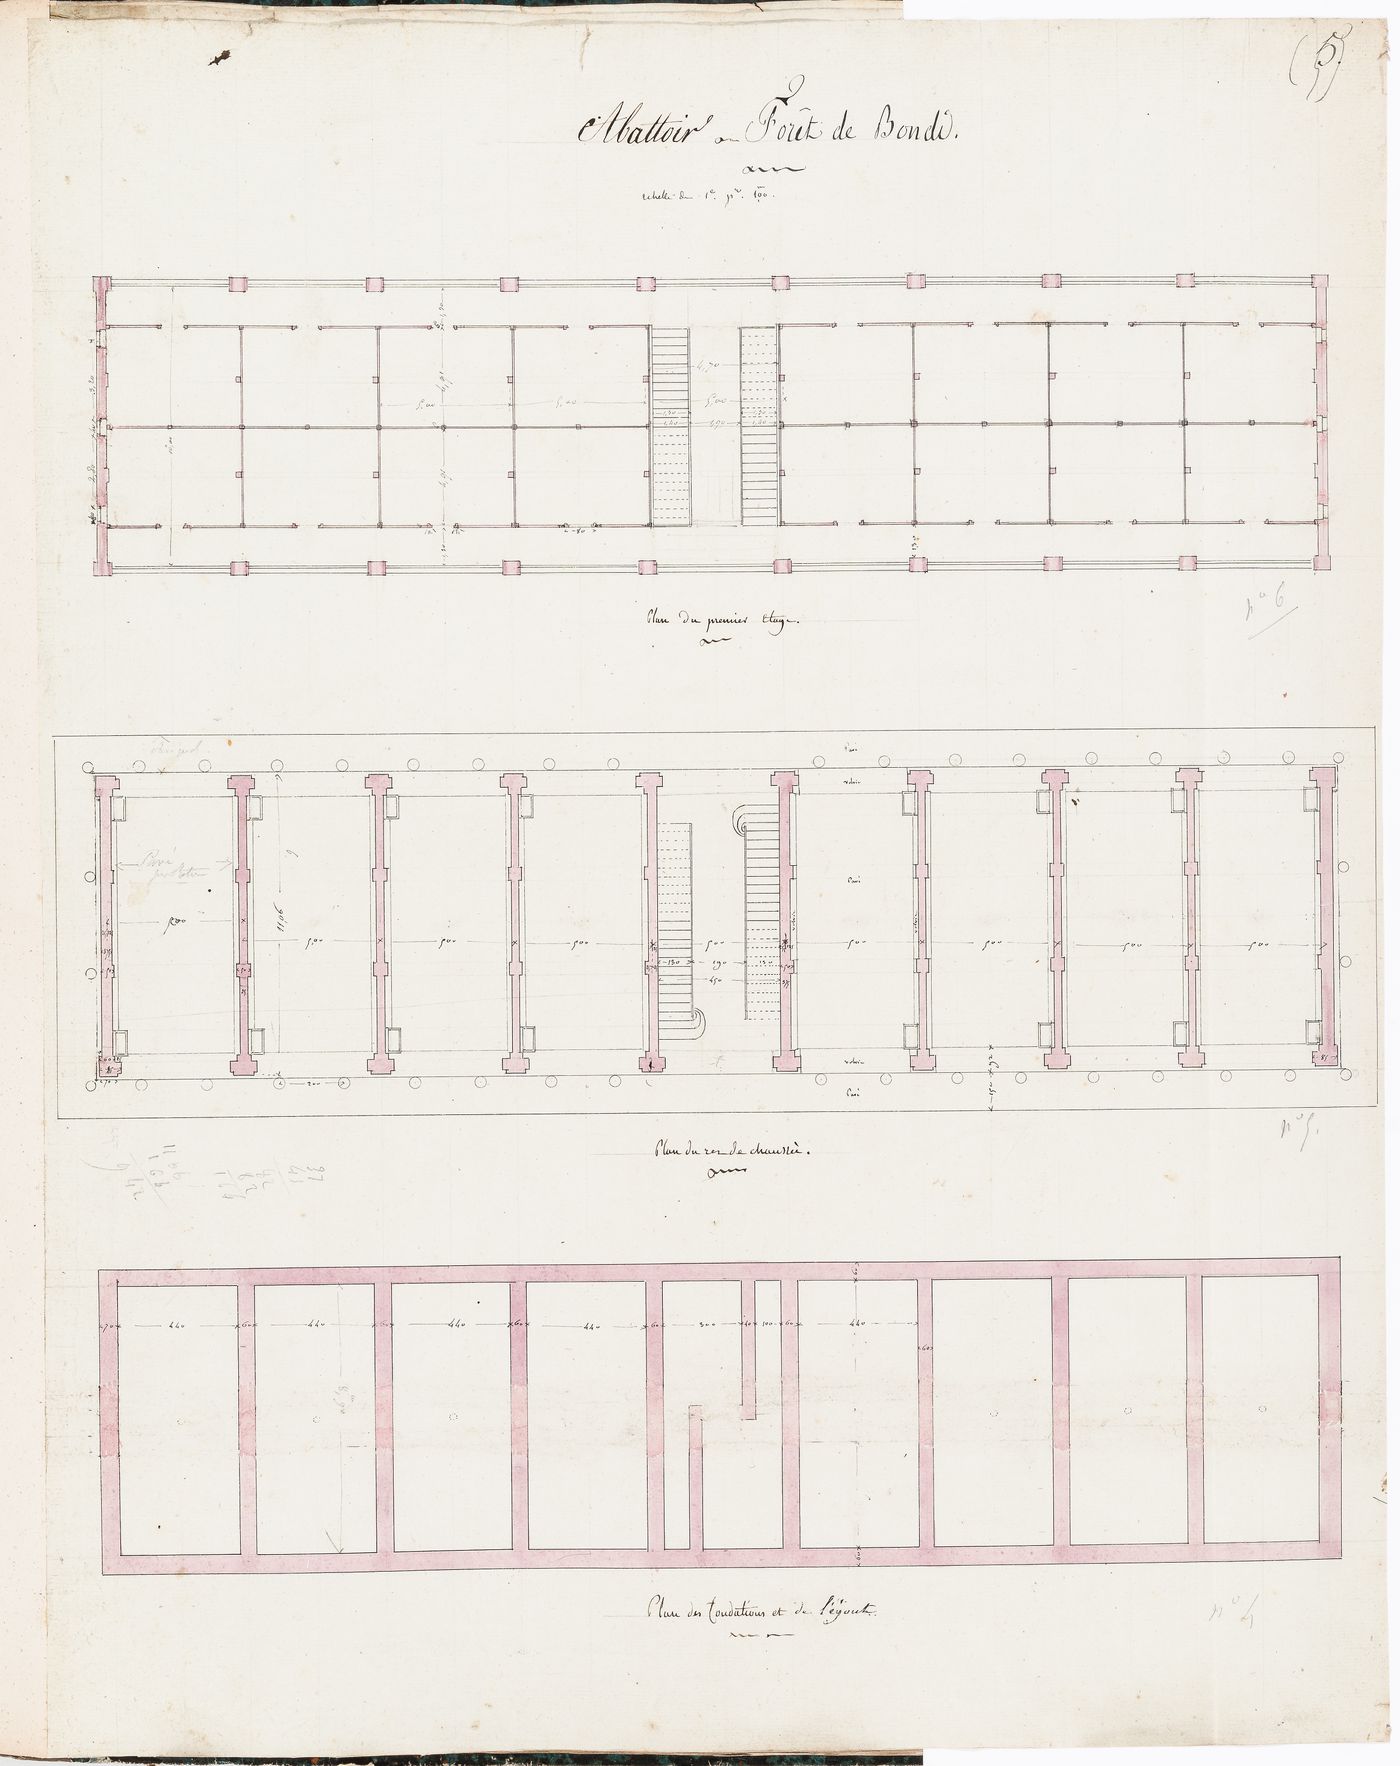 Project for Clos d'équarrissage, fôret de Bondy: Plans for the foundation, ground, and first floors, and sewer system for the slaughterhouse